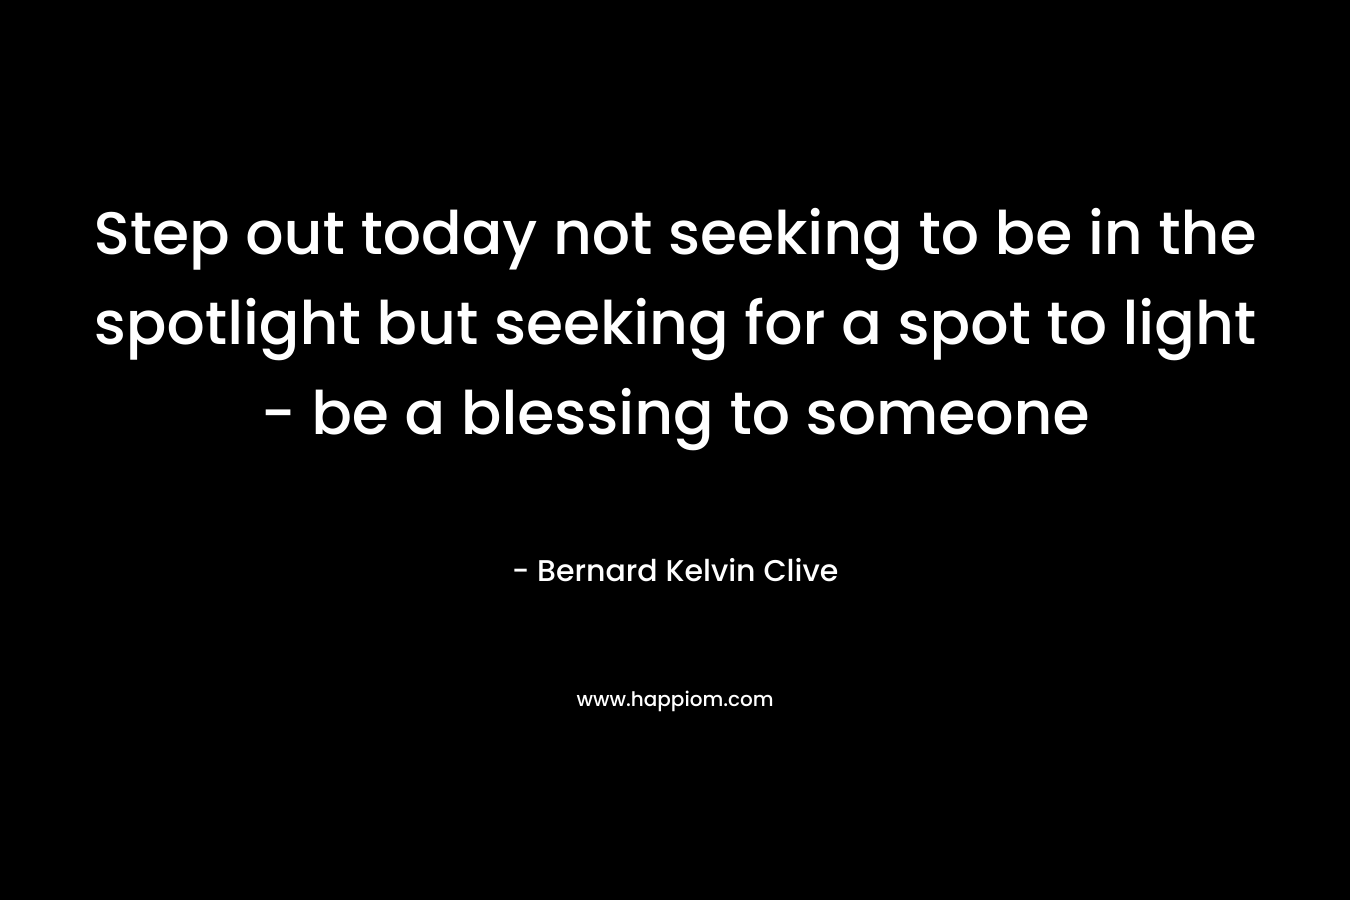 Step out today not seeking to be in the spotlight but seeking for a spot to light - be a blessing to someone